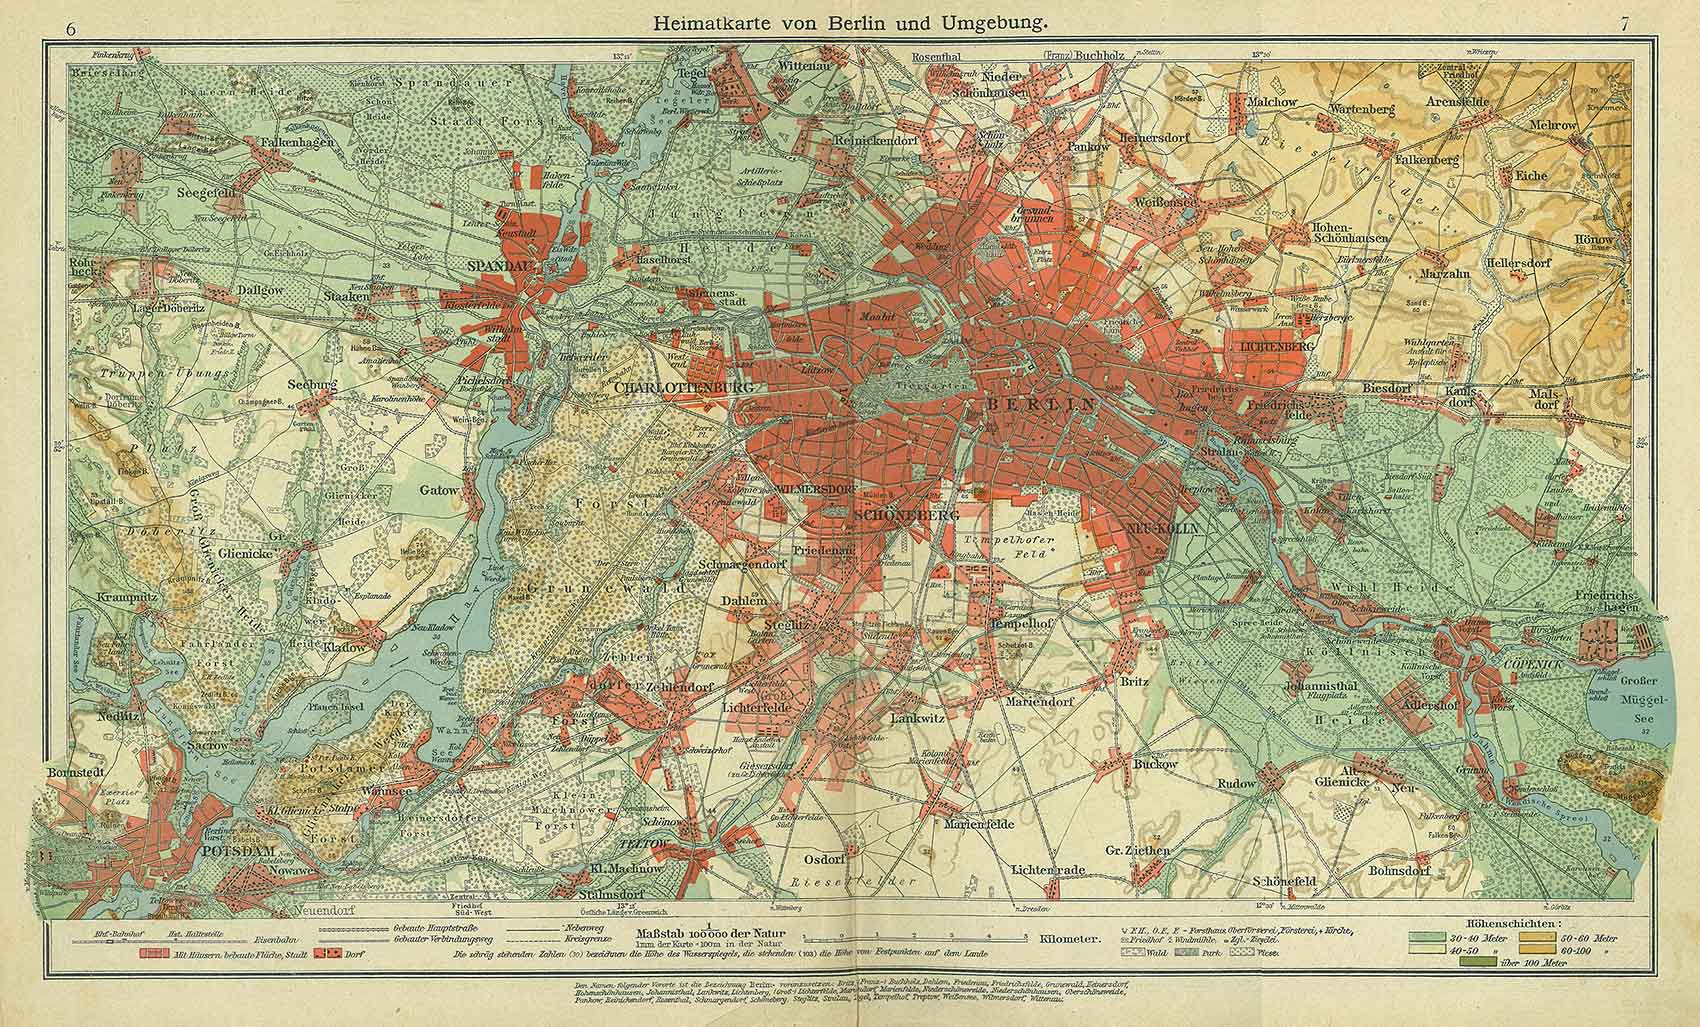 Berlin and its environs, Andrees 'Berliner Schul-Atlas', 1916, pages 6 to 7, published size to print borders 43.84 cm wide by 26.17 cm high.